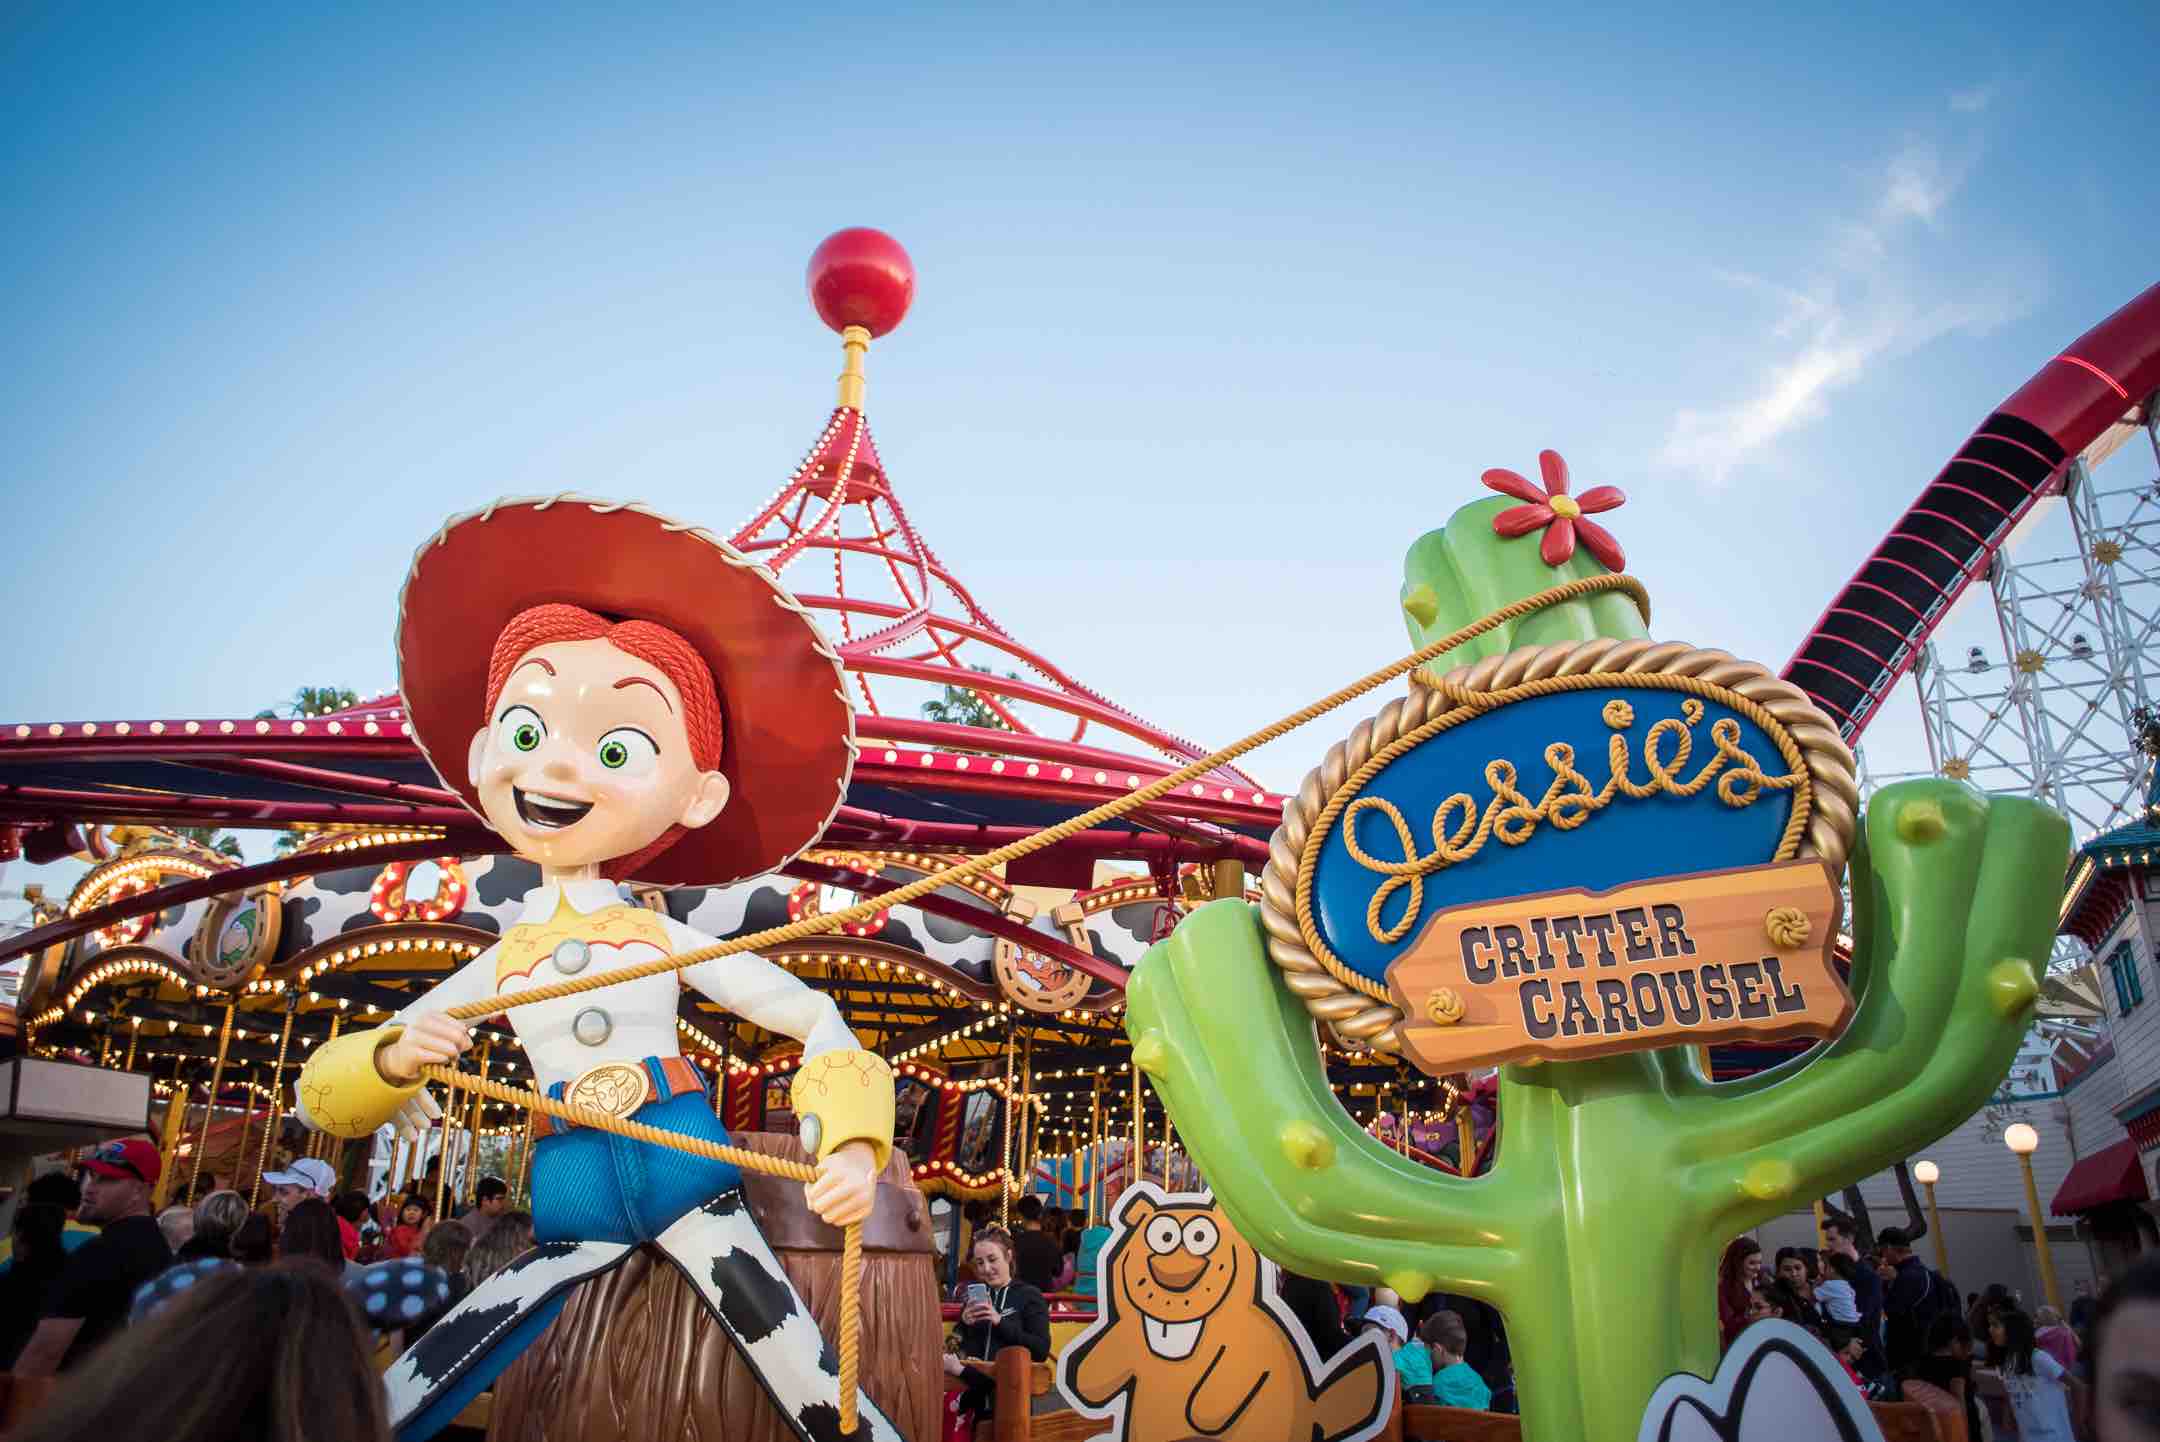 How Many Days Do you Need at Disneyland? Tips featured by top US Disney blogger, Marcie and the Mouse: Jessie's Critter Carousel is a newer attraction on Pixar Pier at Disney California Adventure